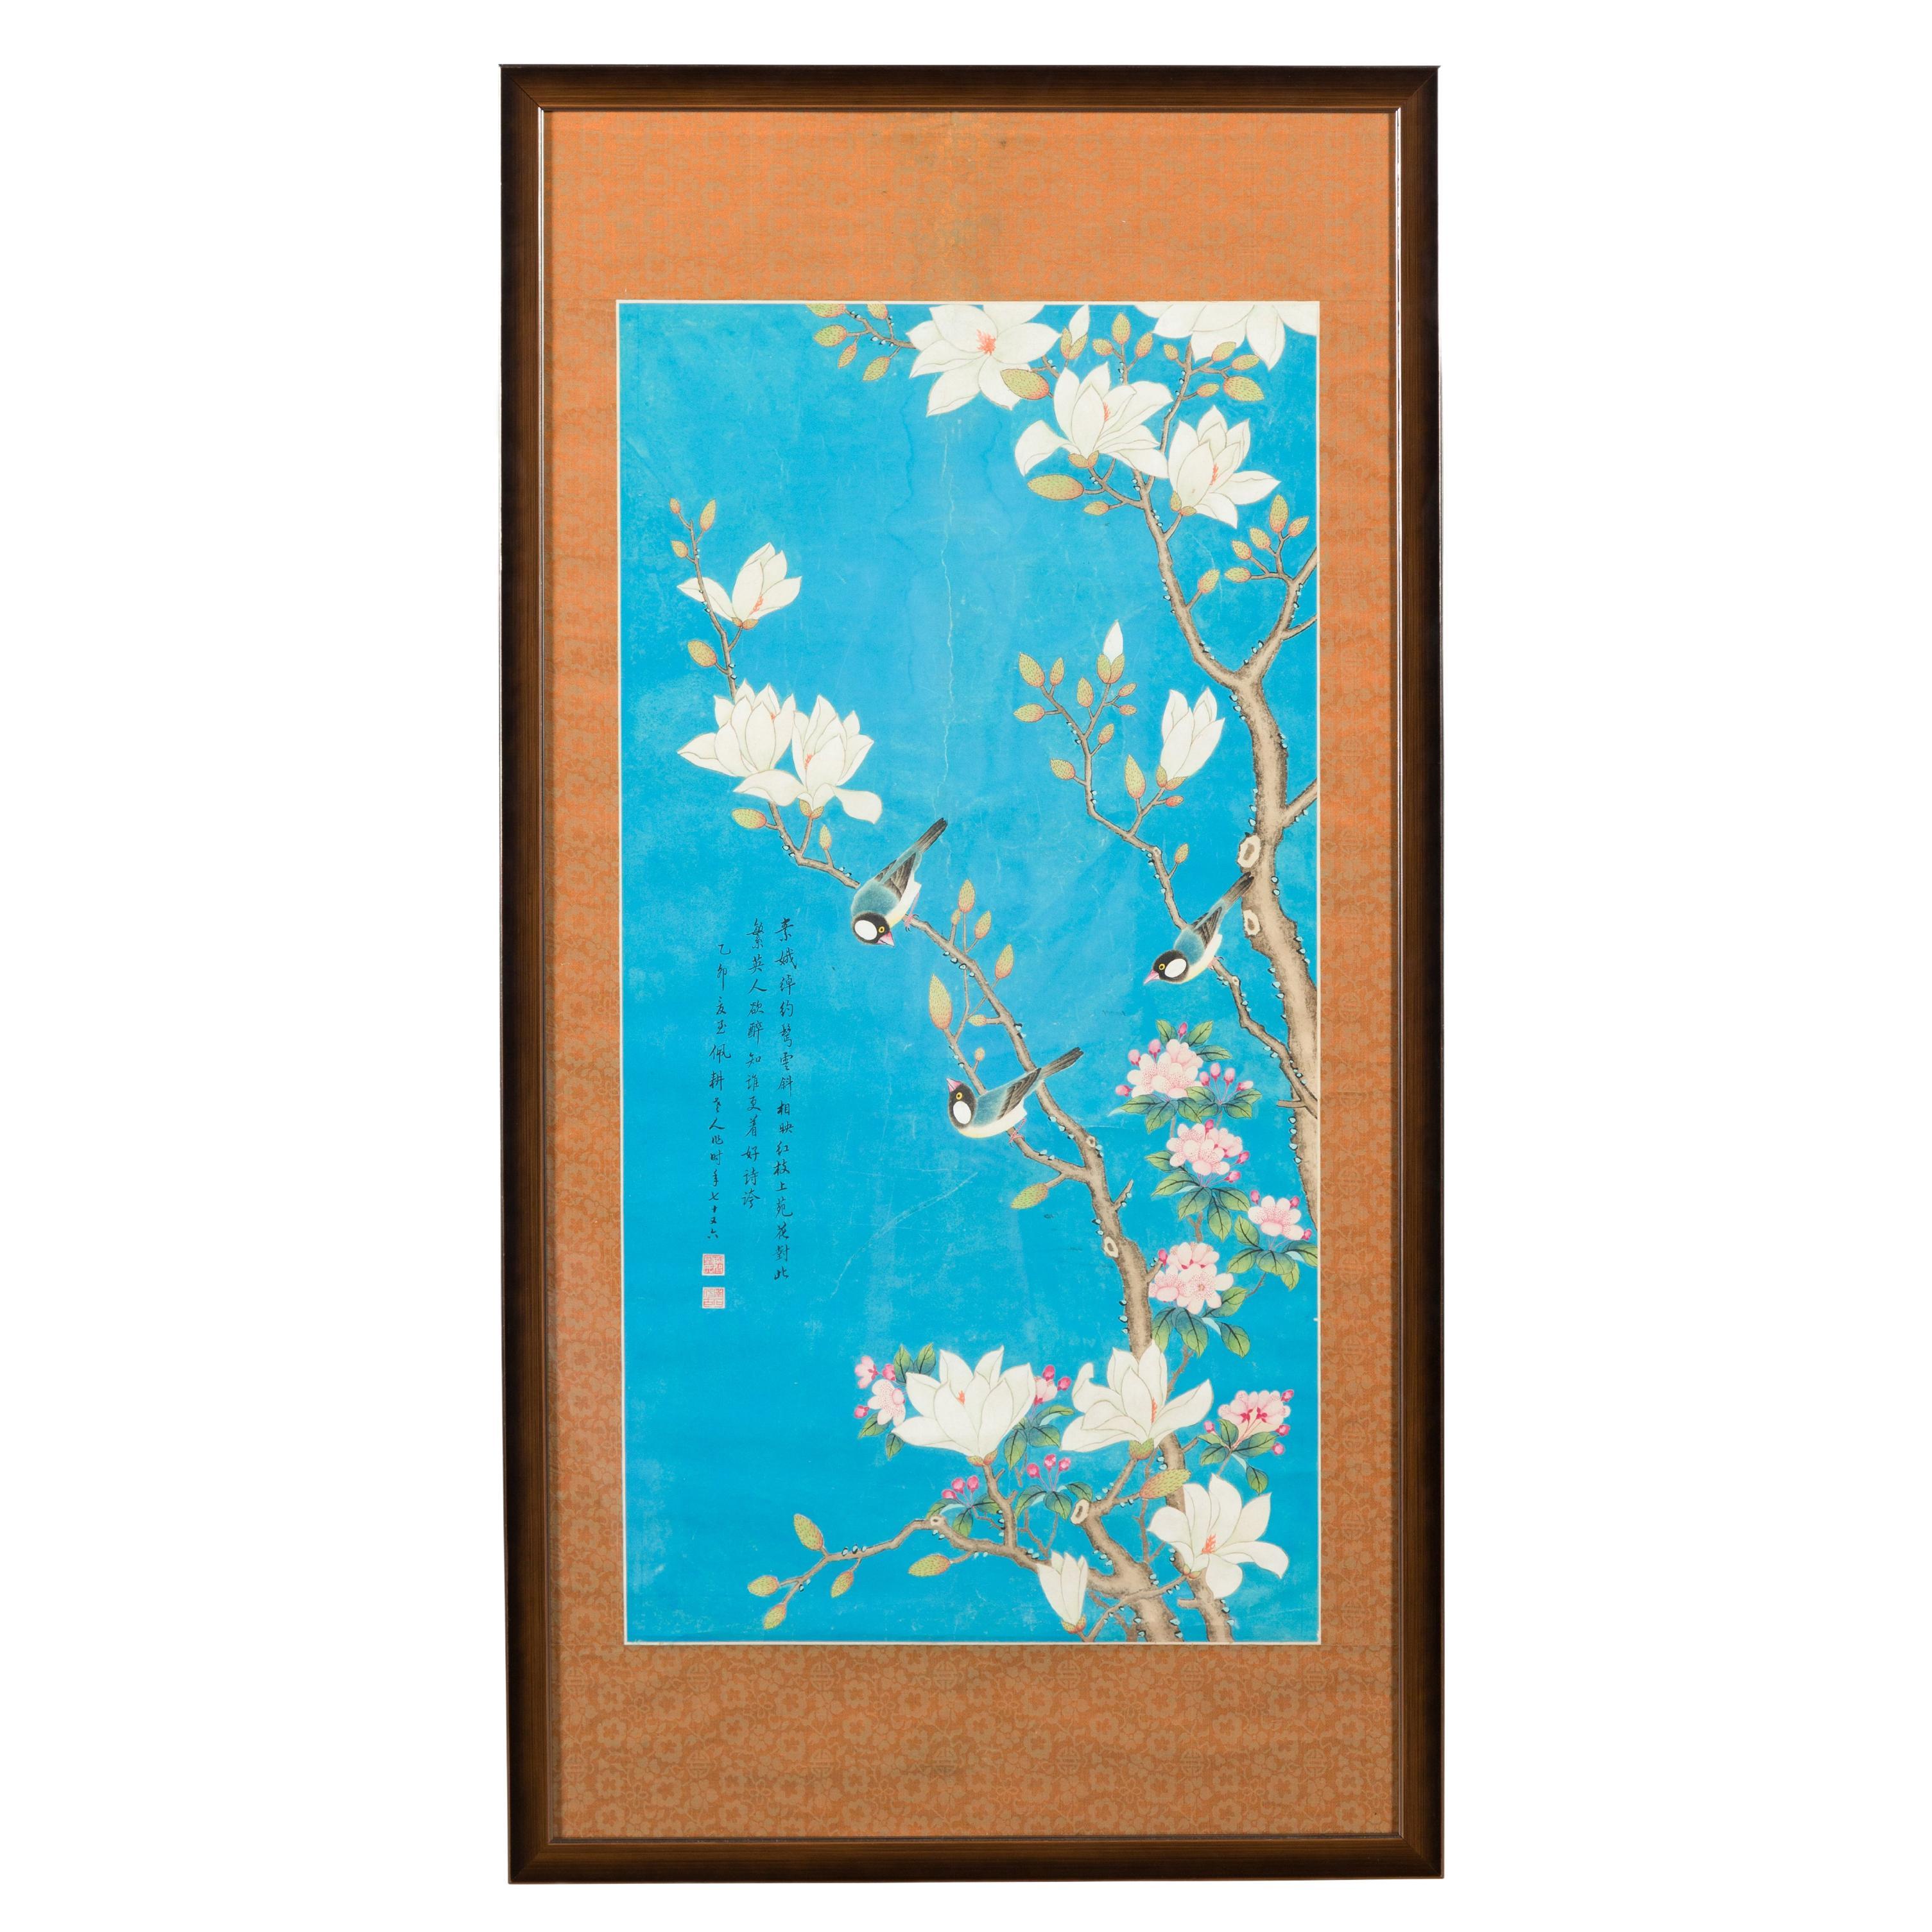 Qing Dynasty 19th Century Turquoise Print Depicting Birds Perched in a Tree